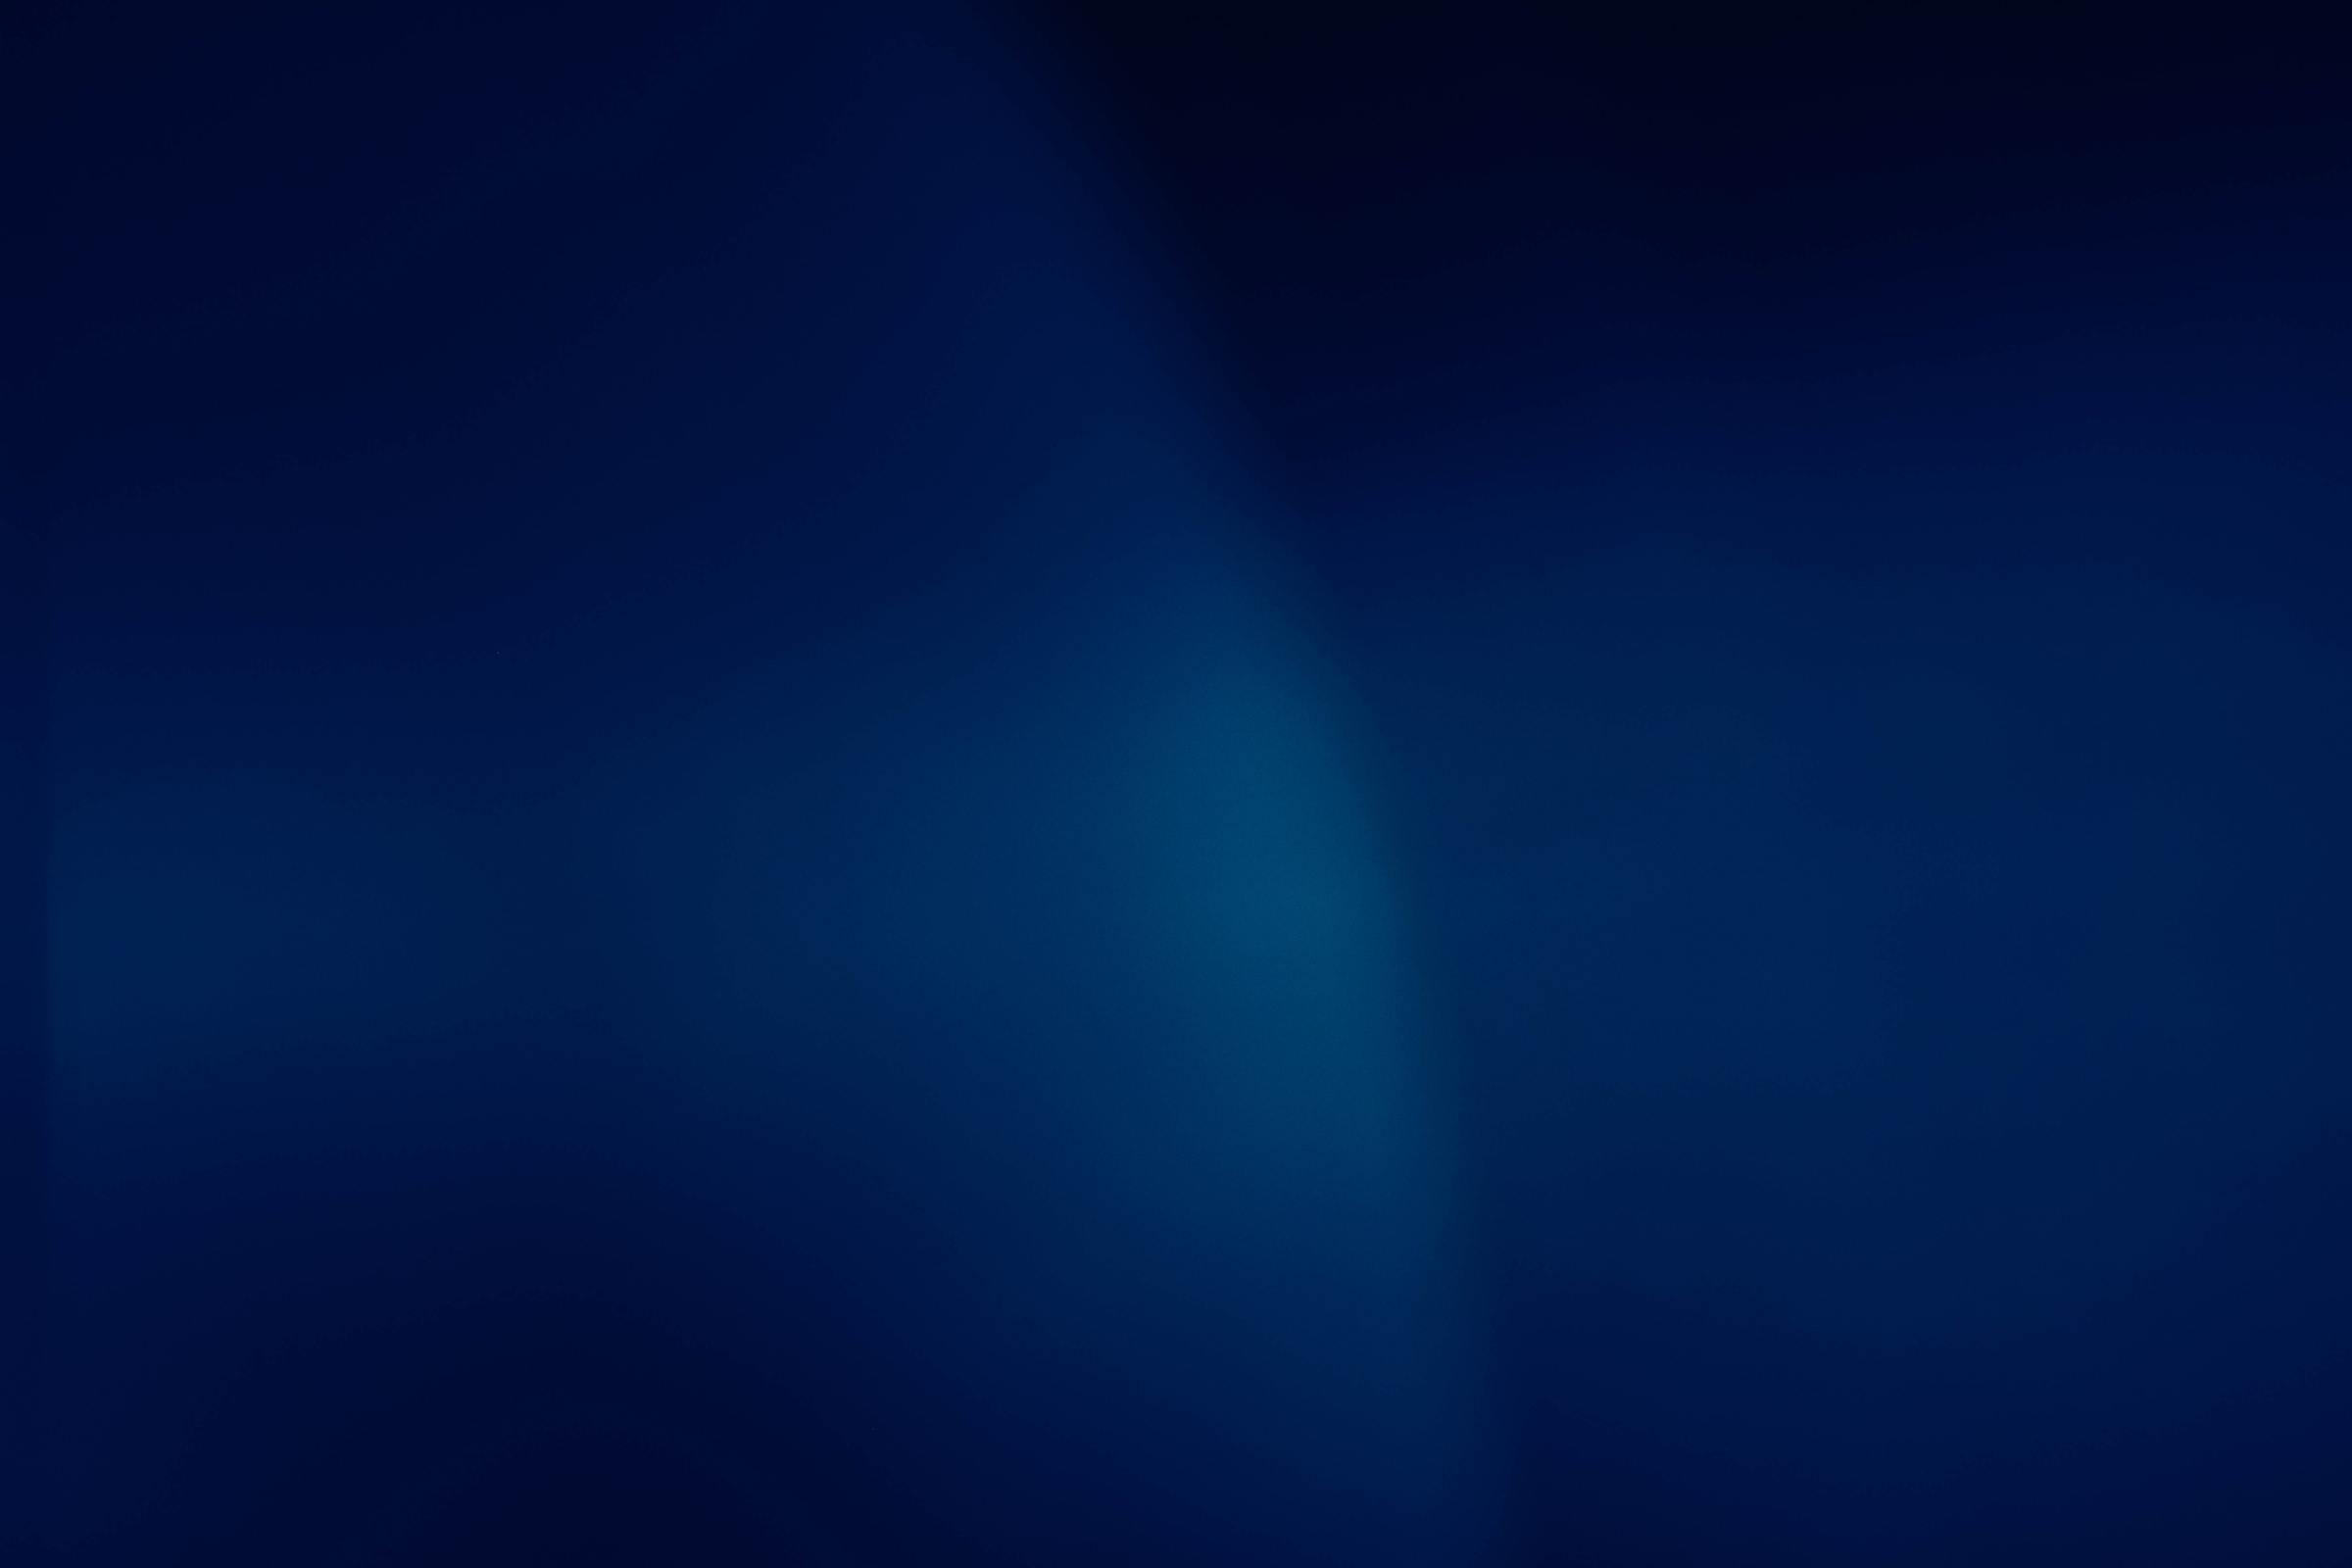 defocused navy blue abstract background lens flare